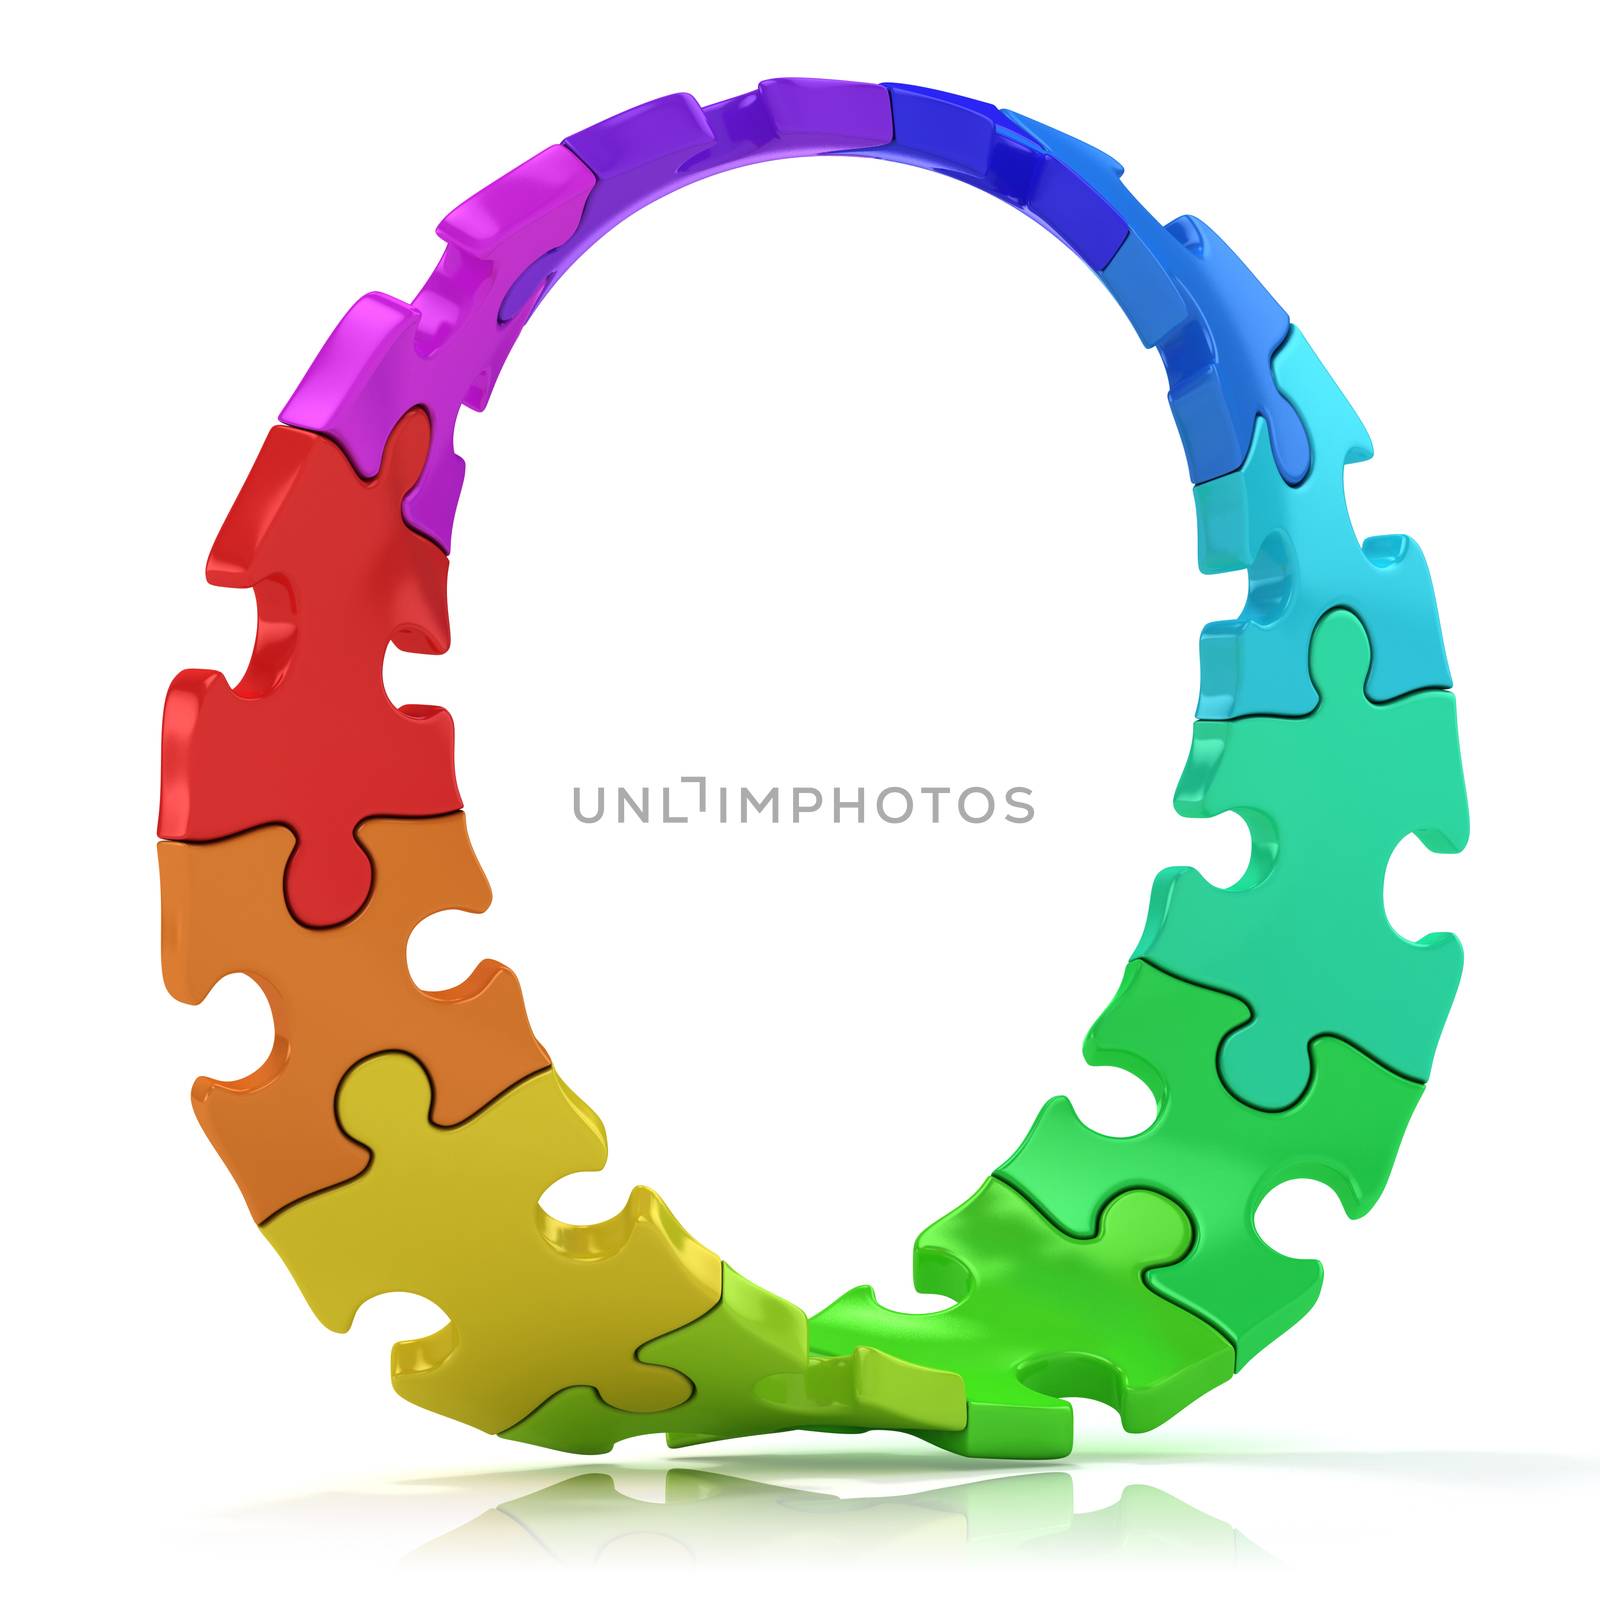 Twisted circle of colorful jigsaw puzzles. Isolated on white background.